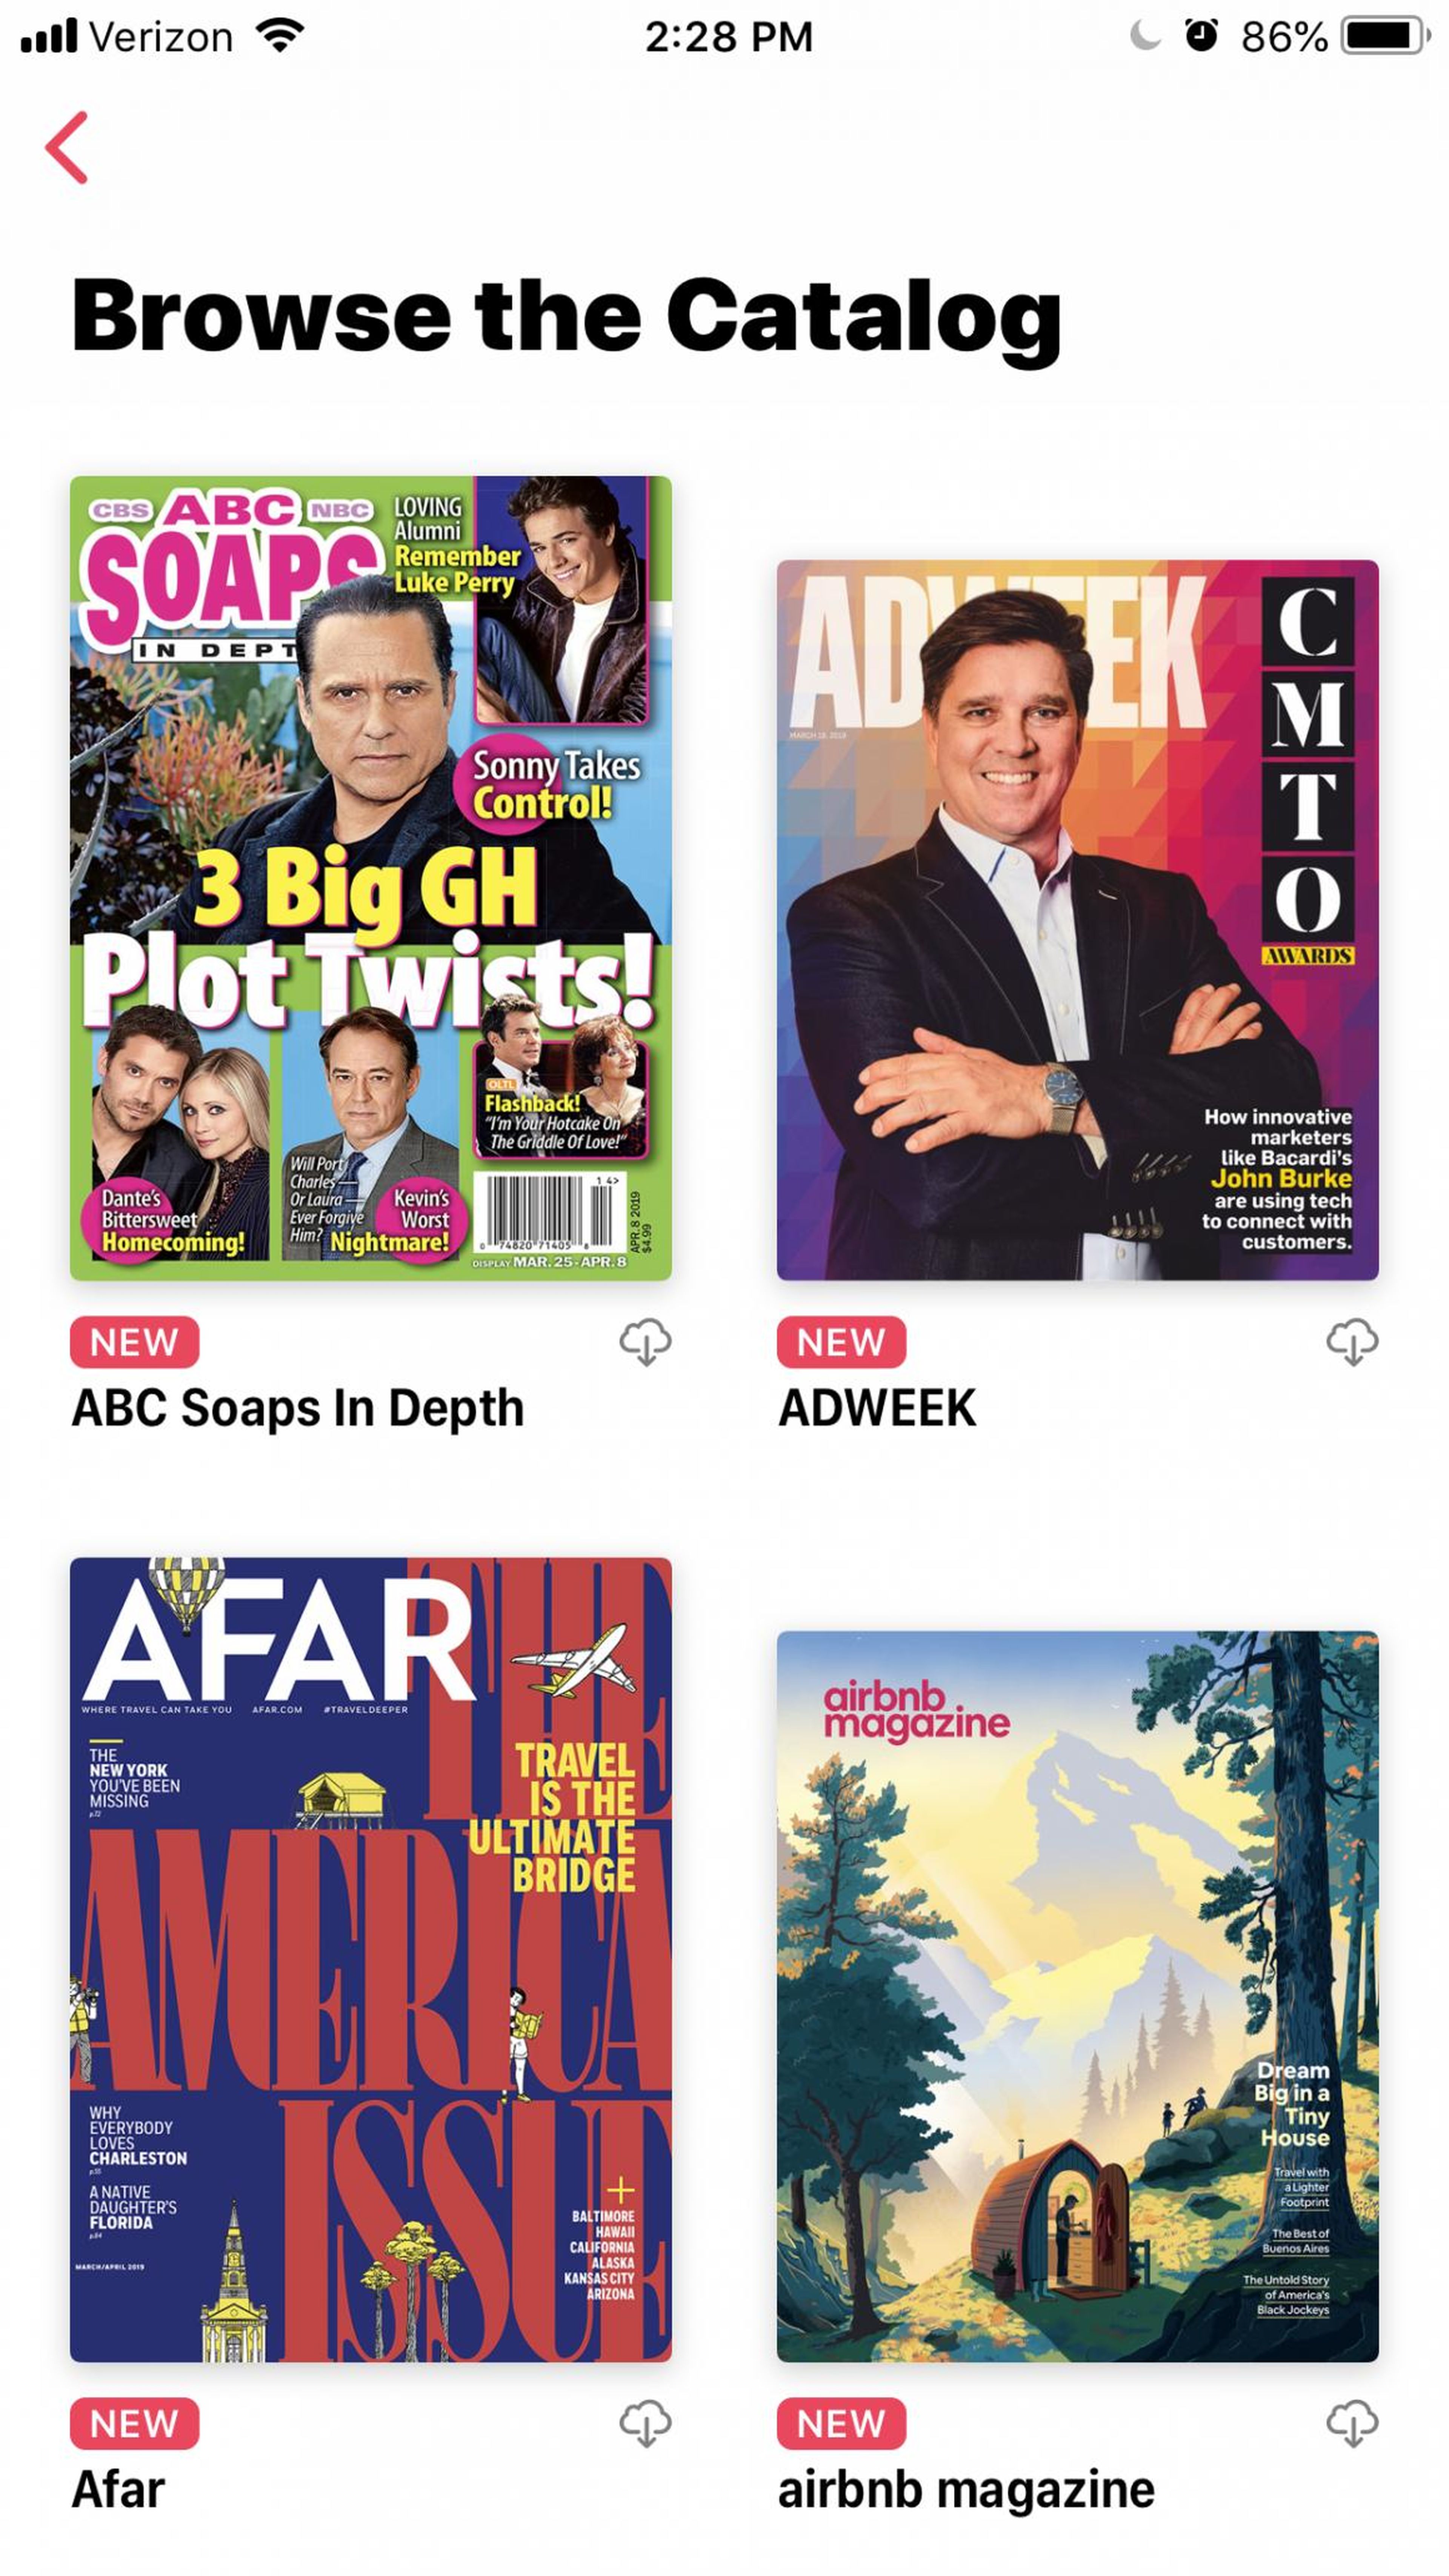 You can browse the app's catalog of more than 300 magazines alphabetically.